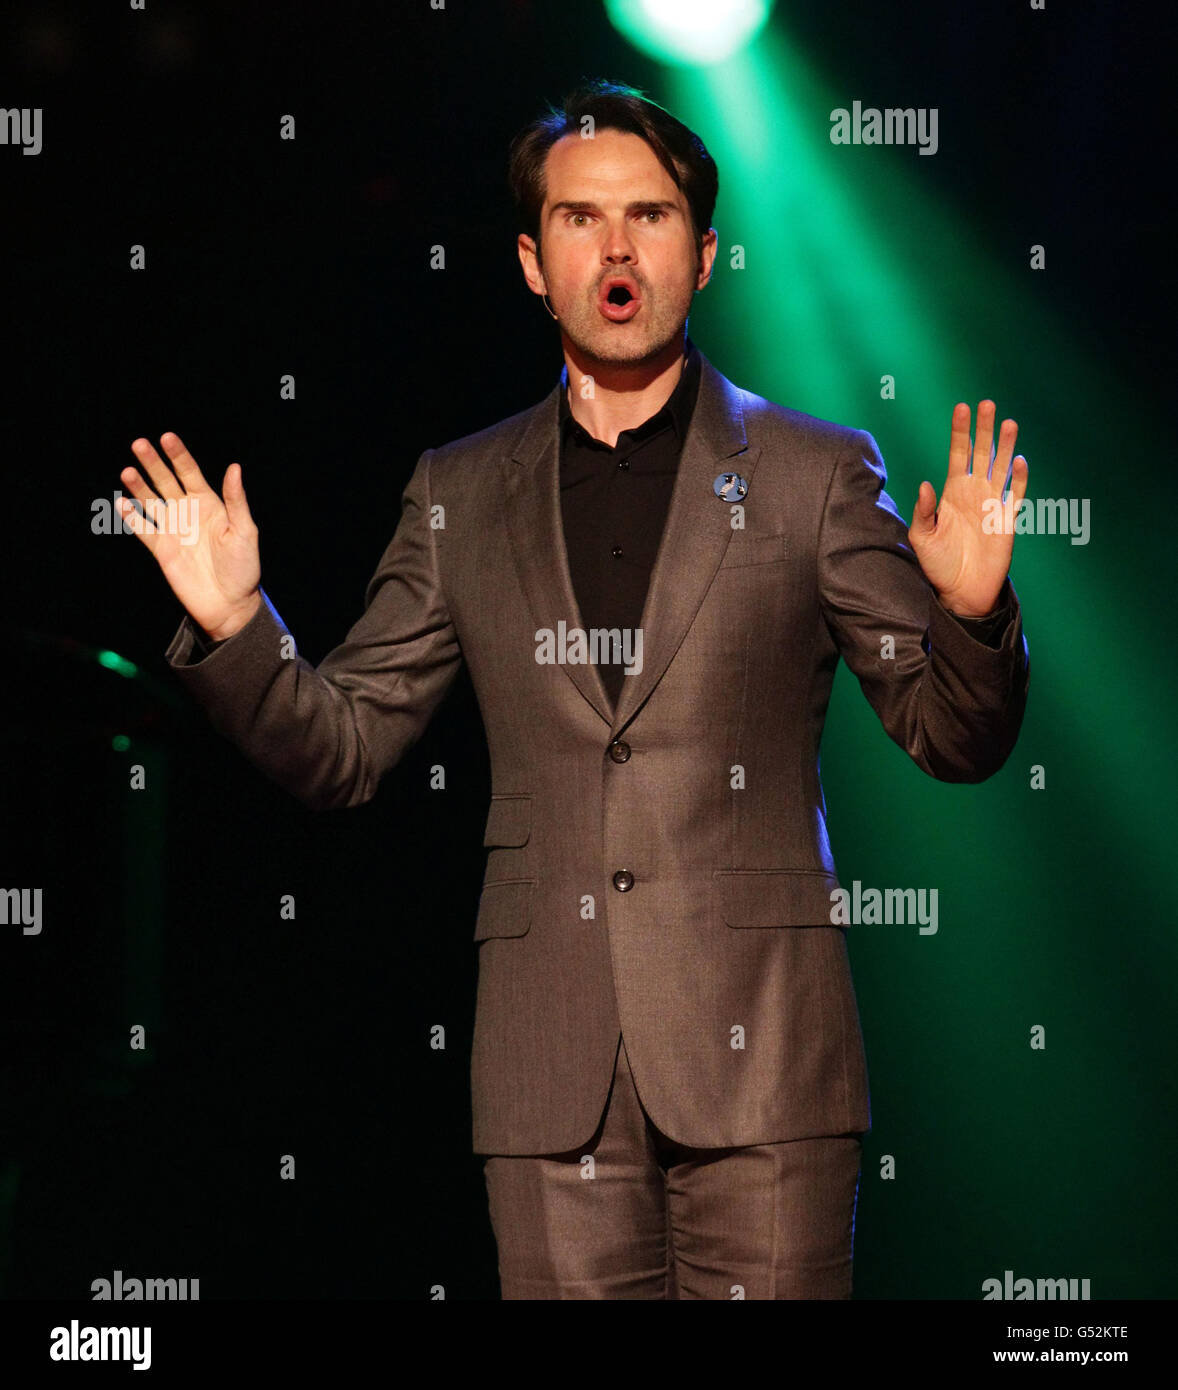 Teenage Cancer Trust evening of comedy - London. Jimmy Carr on stage during the Teenage Cancer Trust Comedy Night, at the Royal Albert Hall in west London. Stock Photo